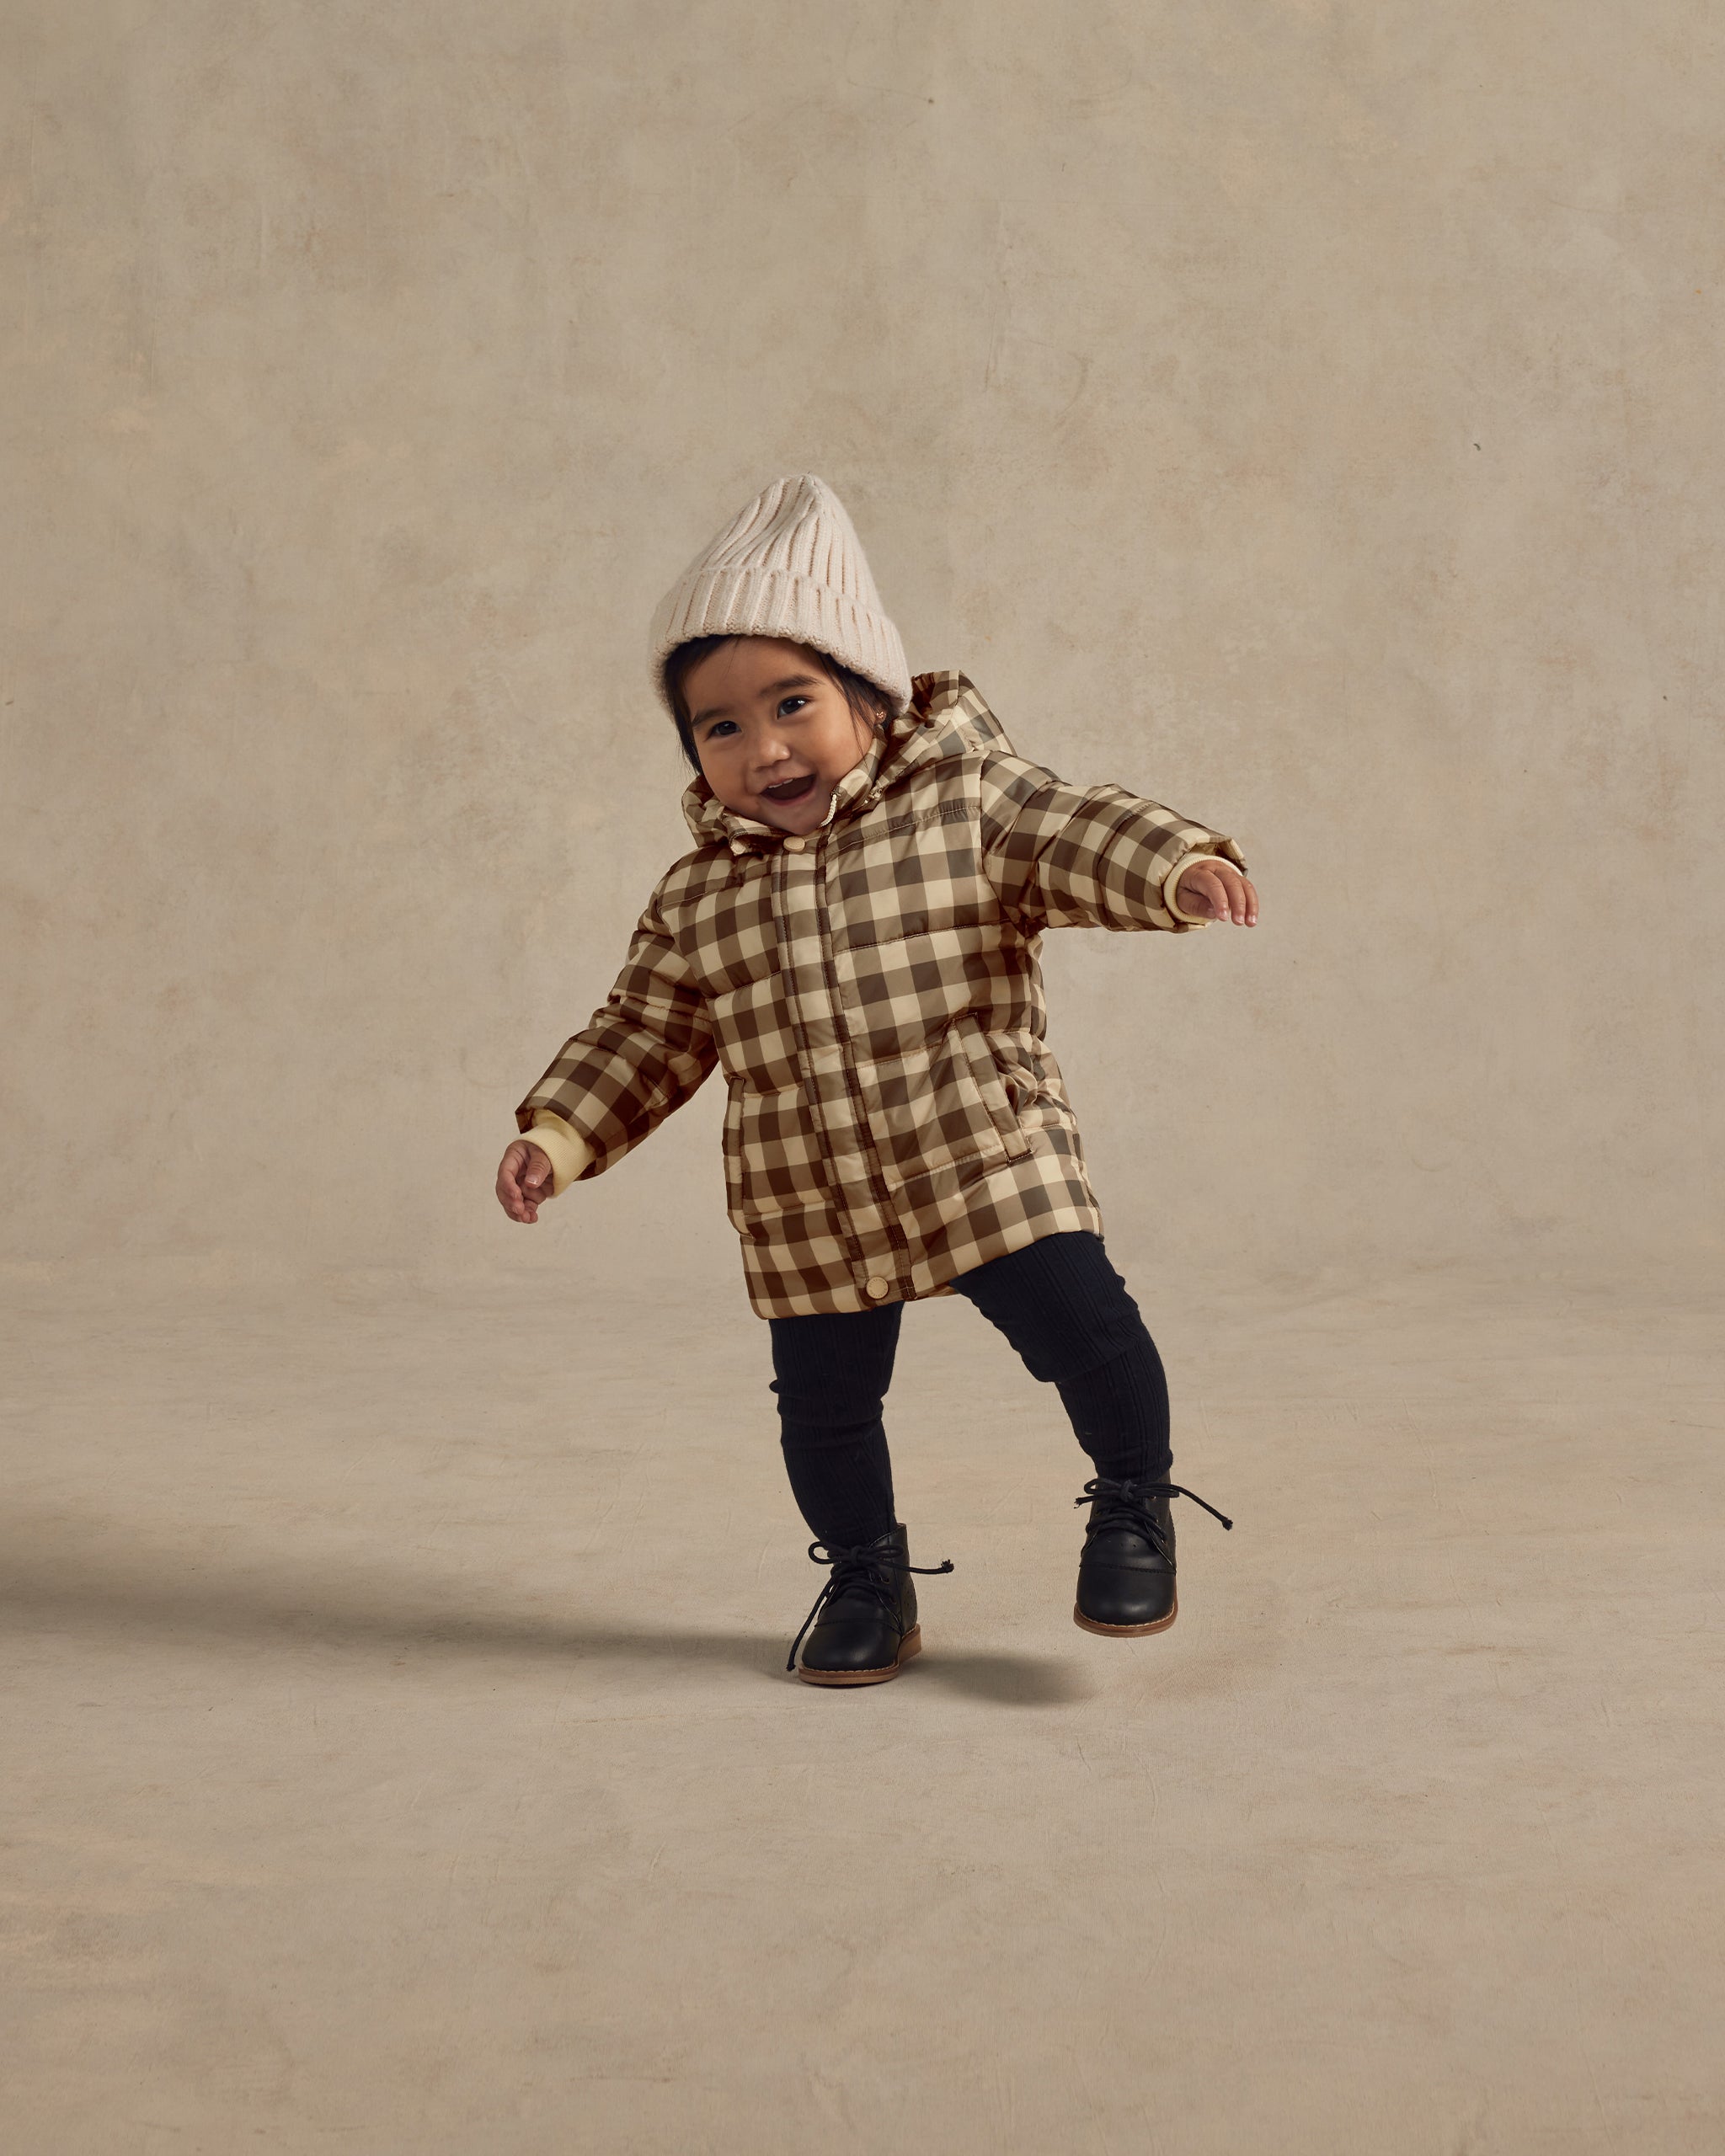 Ski Jacket || Charcoal Check - Rylee + Cru | Kids Clothes | Trendy Baby Clothes | Modern Infant Outfits |